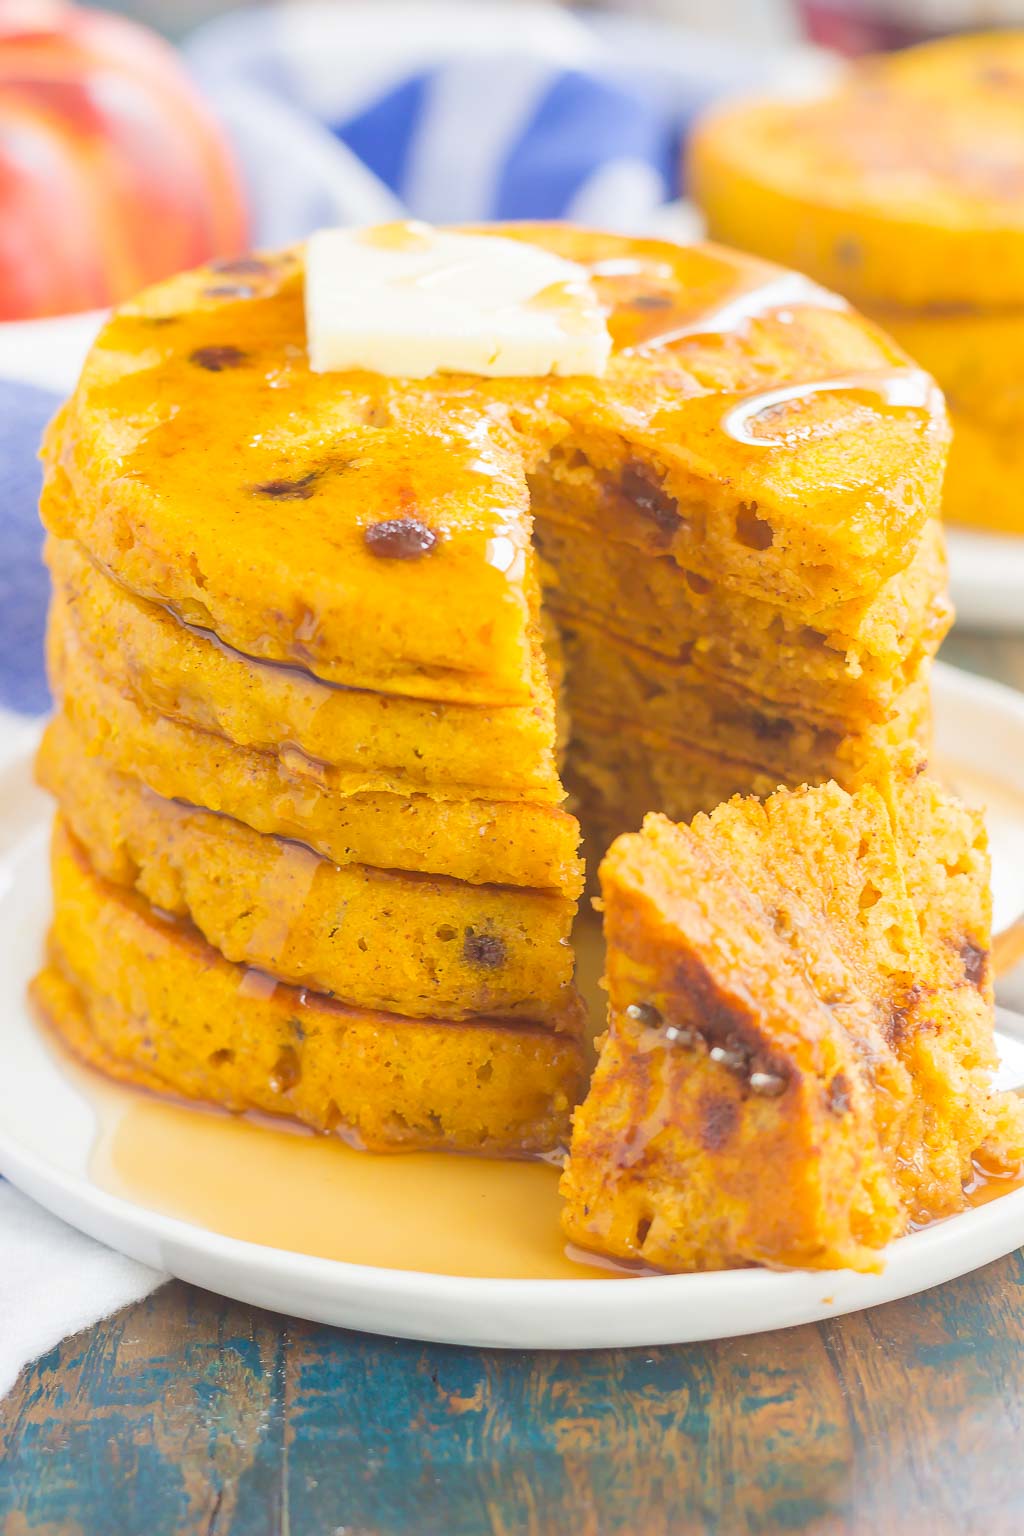 These Pumpkin Chocolate Chip Pancakes make a deliciously cozy breakfast for fall. Filled with sweet pumpkin and bursting with chocolate chips, these simple pancakes are soft, fluffy and so easy to make!  #pancakes #pumpkinpancakes #chocolatechippancakes #pancakerecipe #breakfast